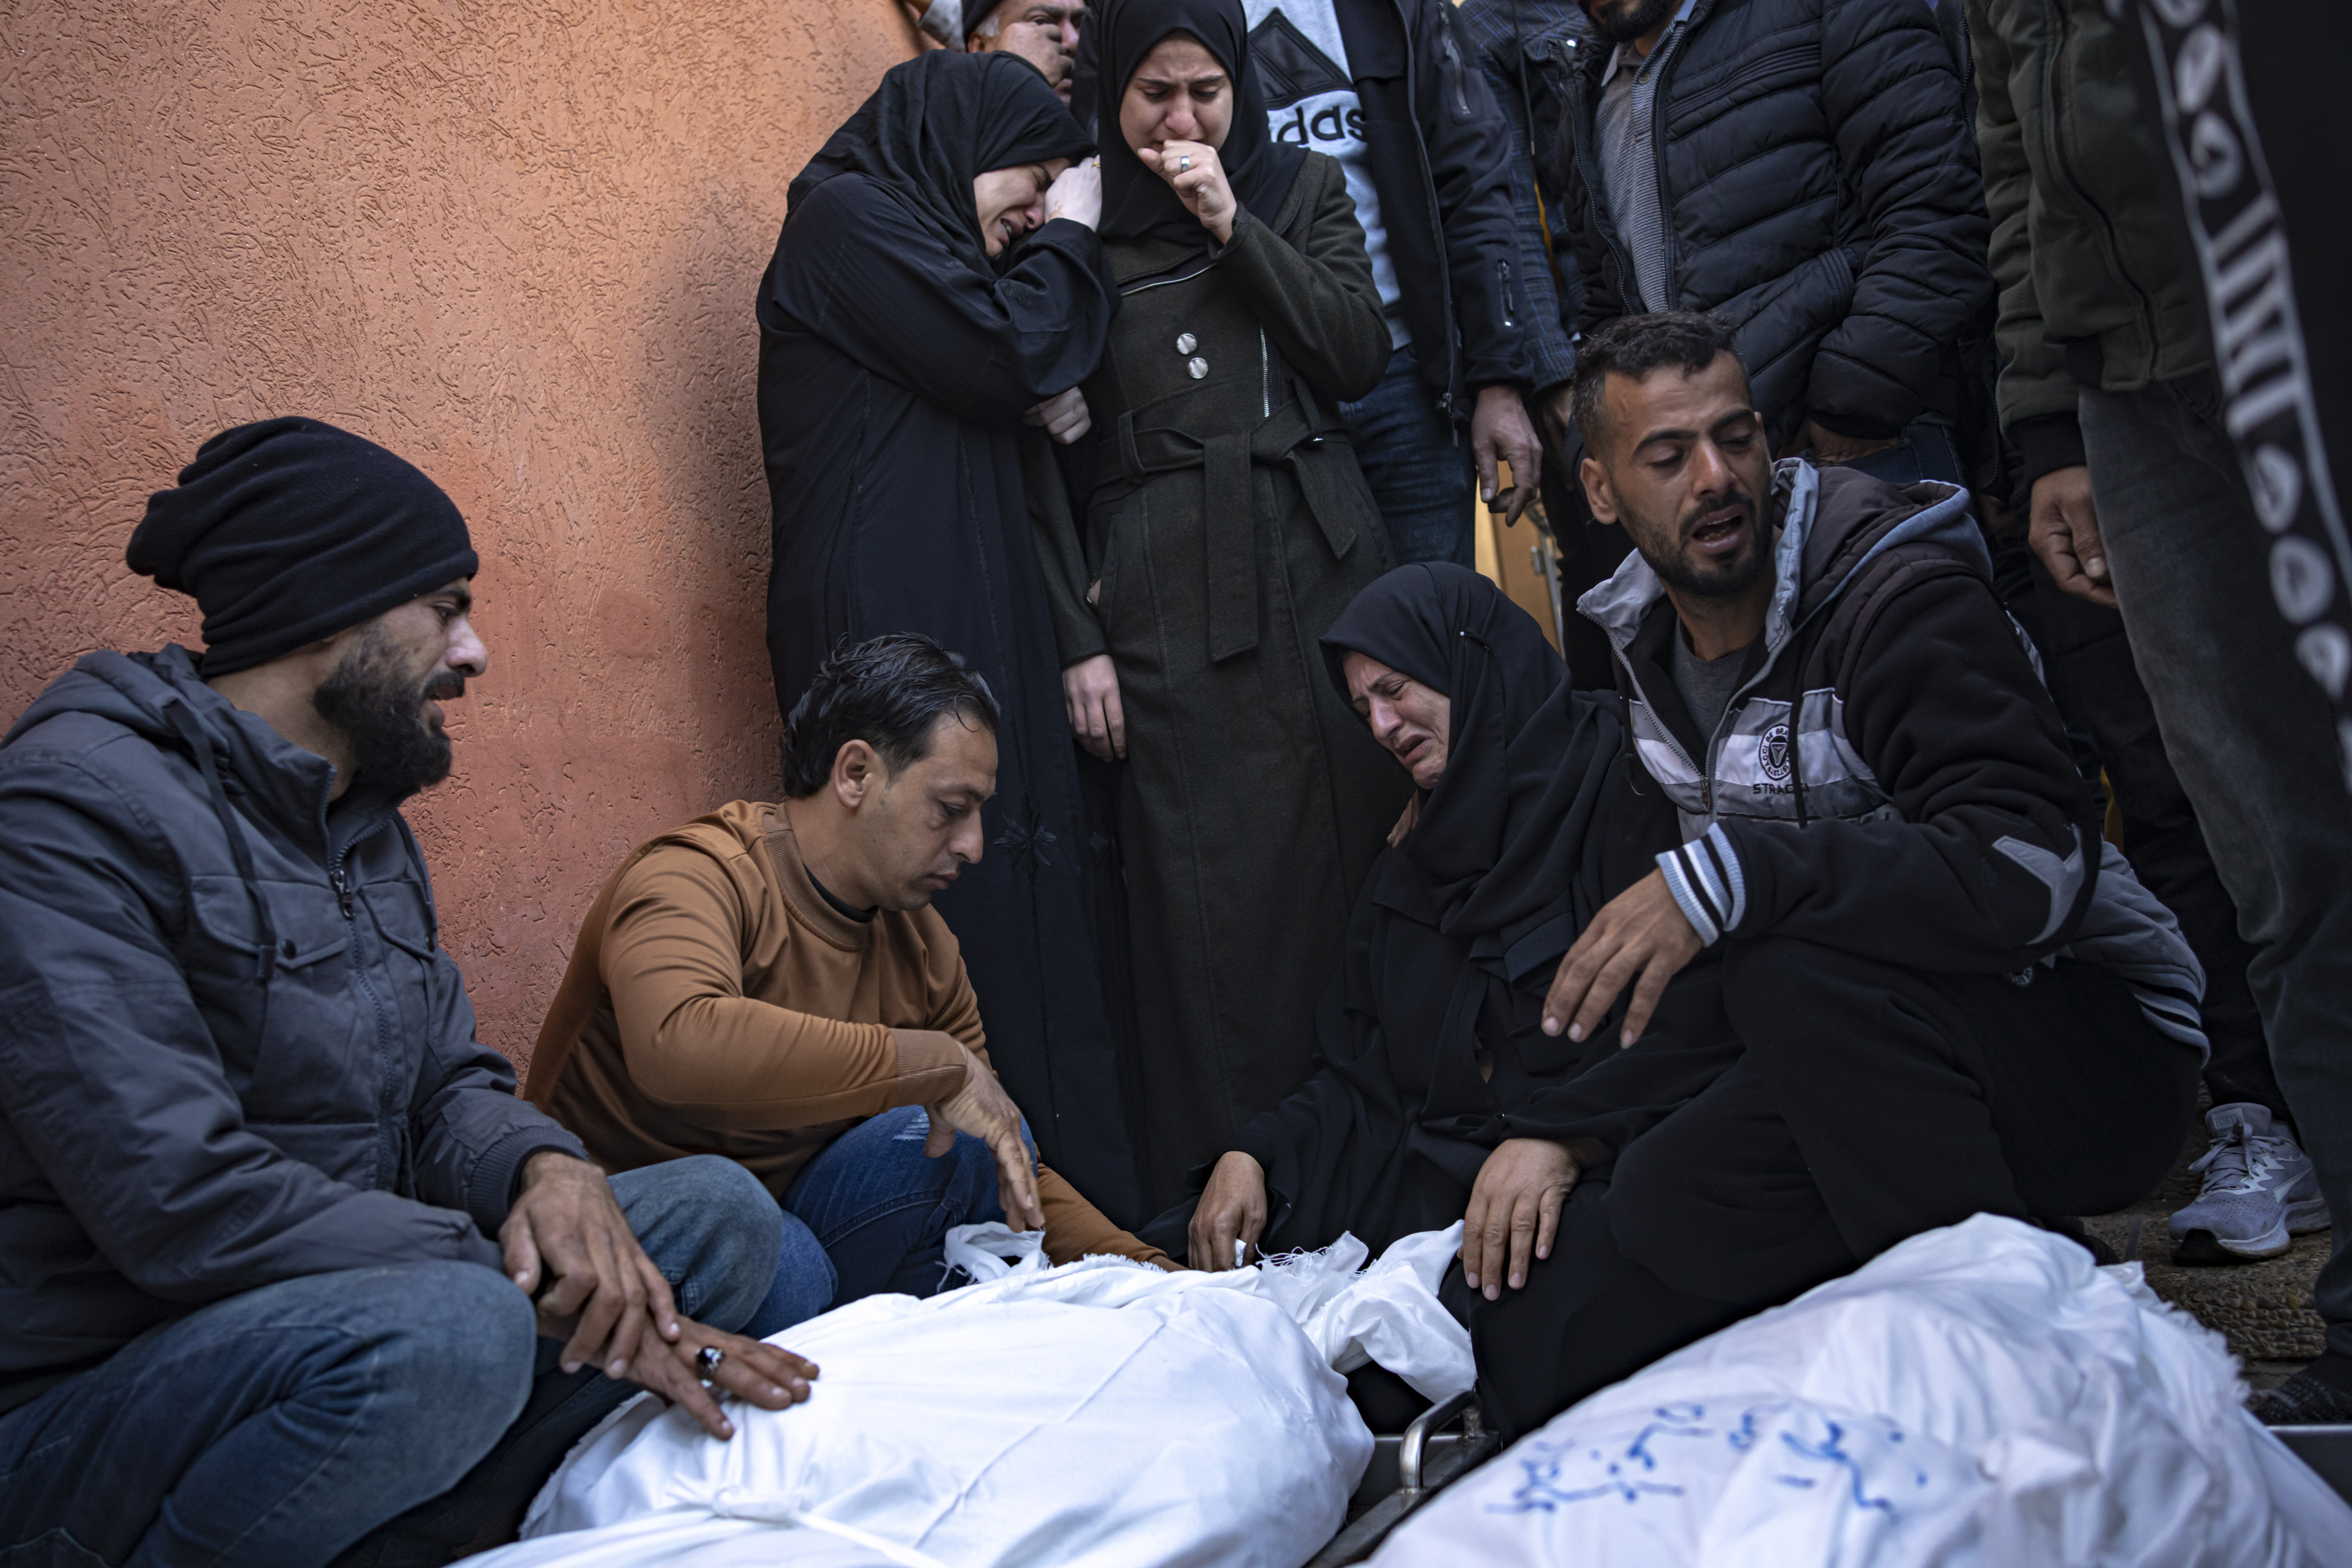 Palestinians mourn their relatives killed in the Israeli bombardment of Gaza, at a hospital in Khan Yunis on Saturday, December 2.